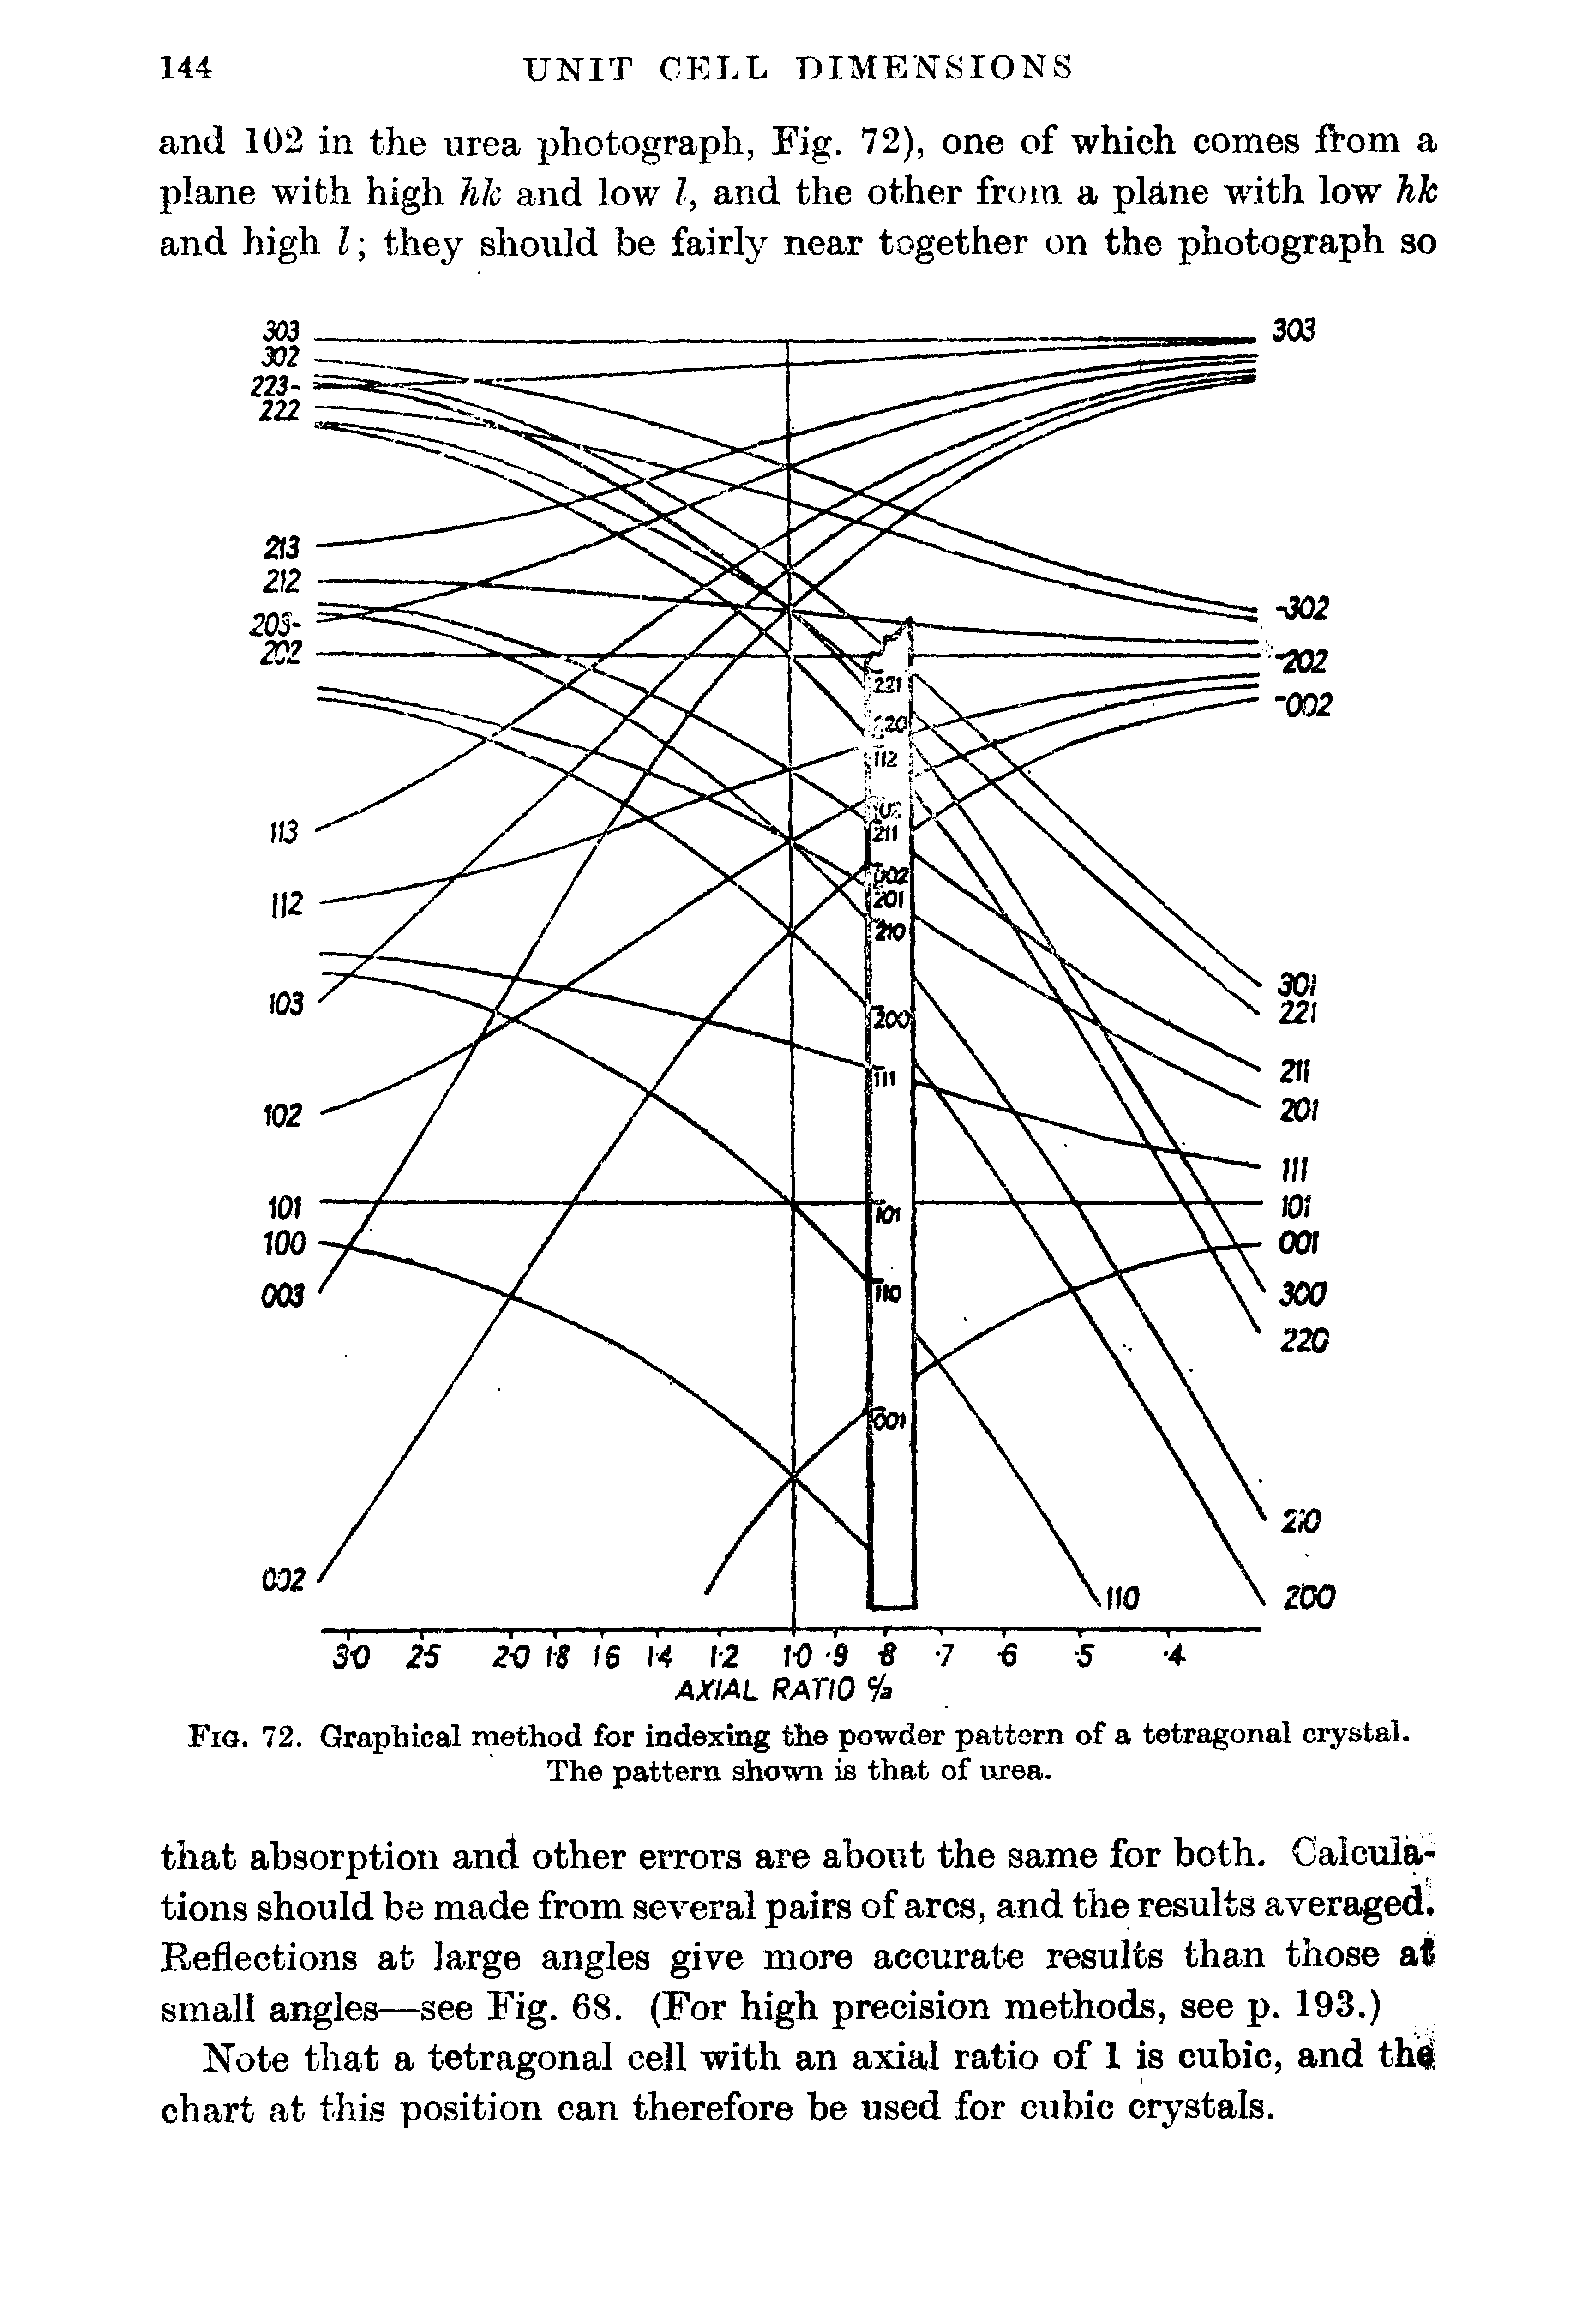 Fig. 72. Graphical method for indexing the powder pattern of a tetragonal crystal. The pattern shown is that of urea.